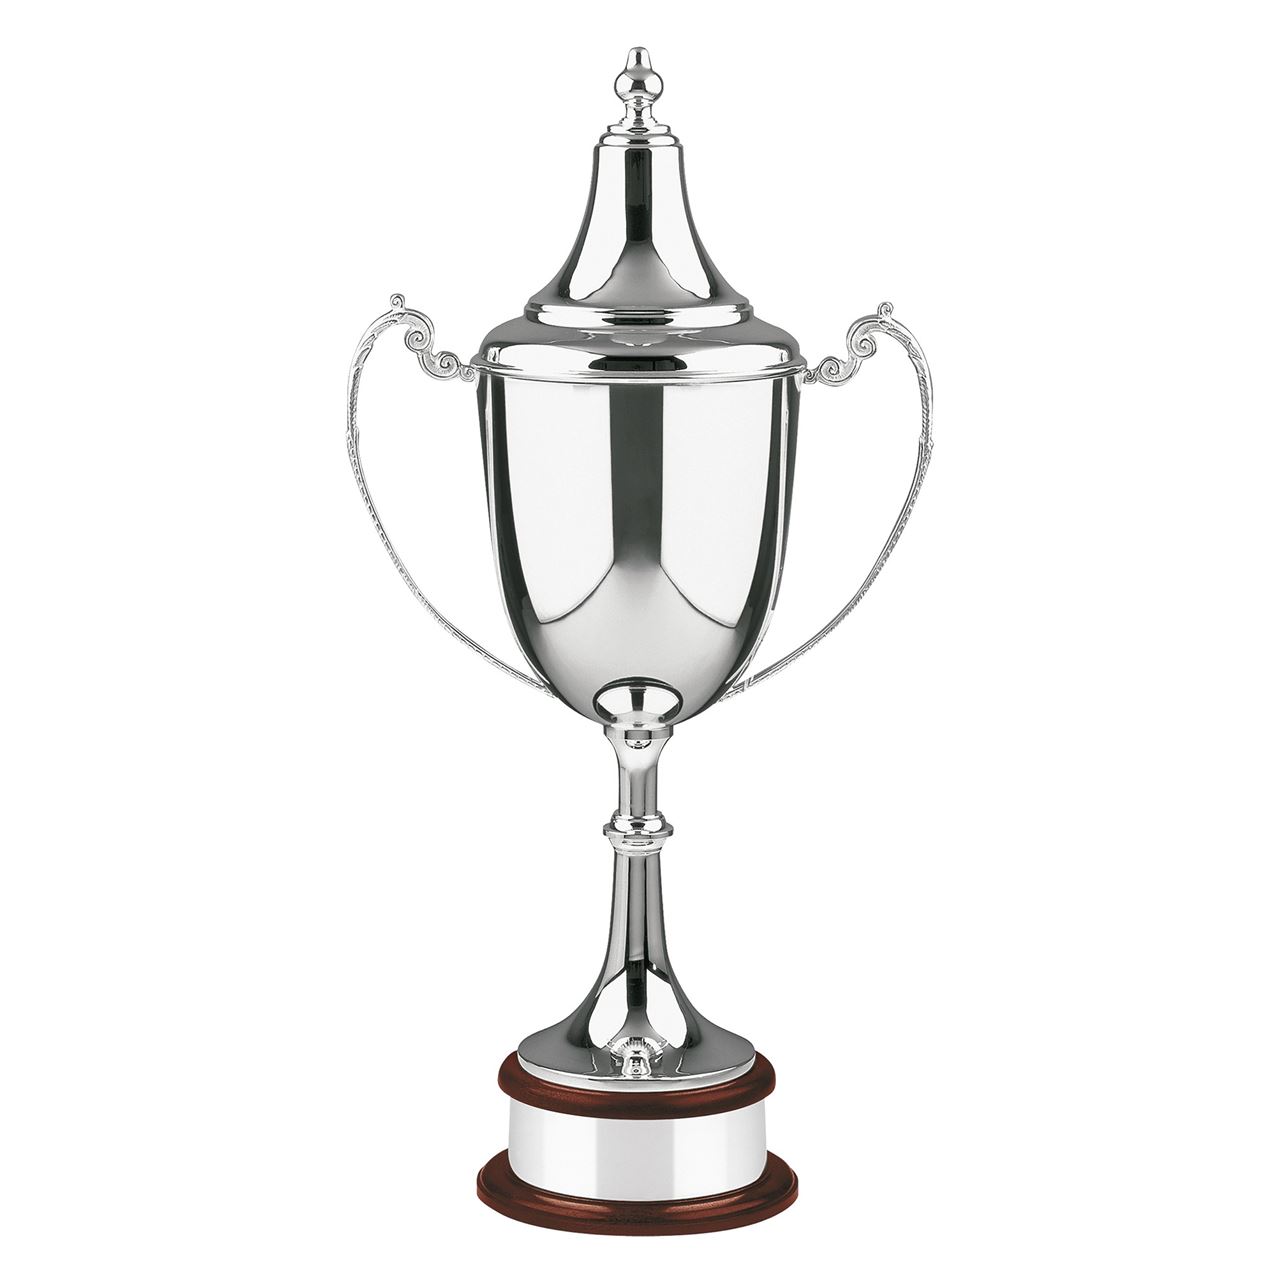 The Champions Silver Plated Ultimate Cup - L486